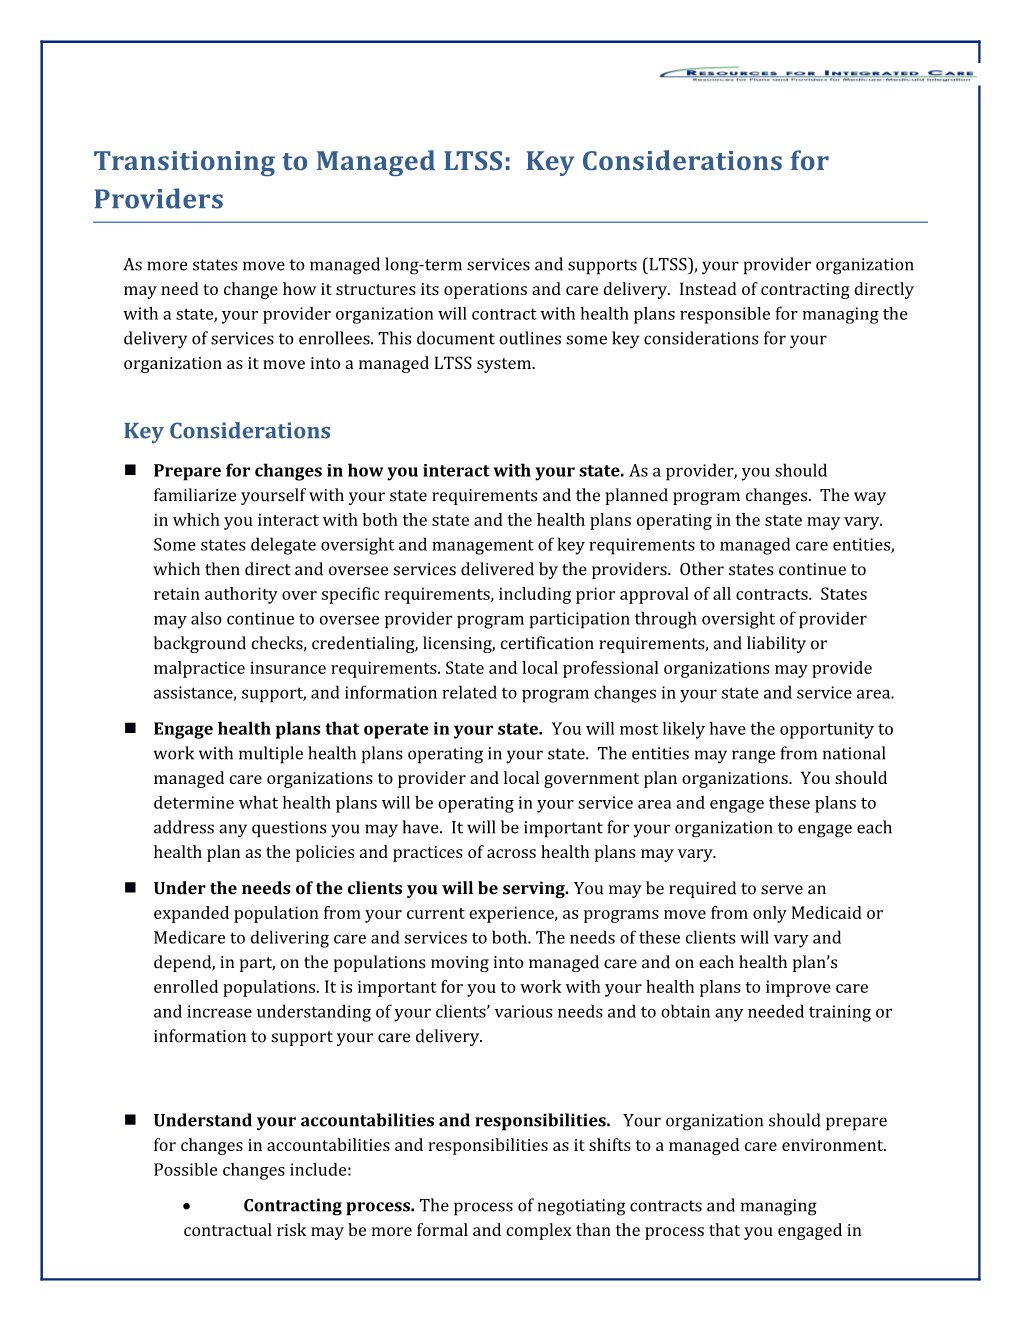 Transitioning to Managed LTSS: Key Considerations for Providers